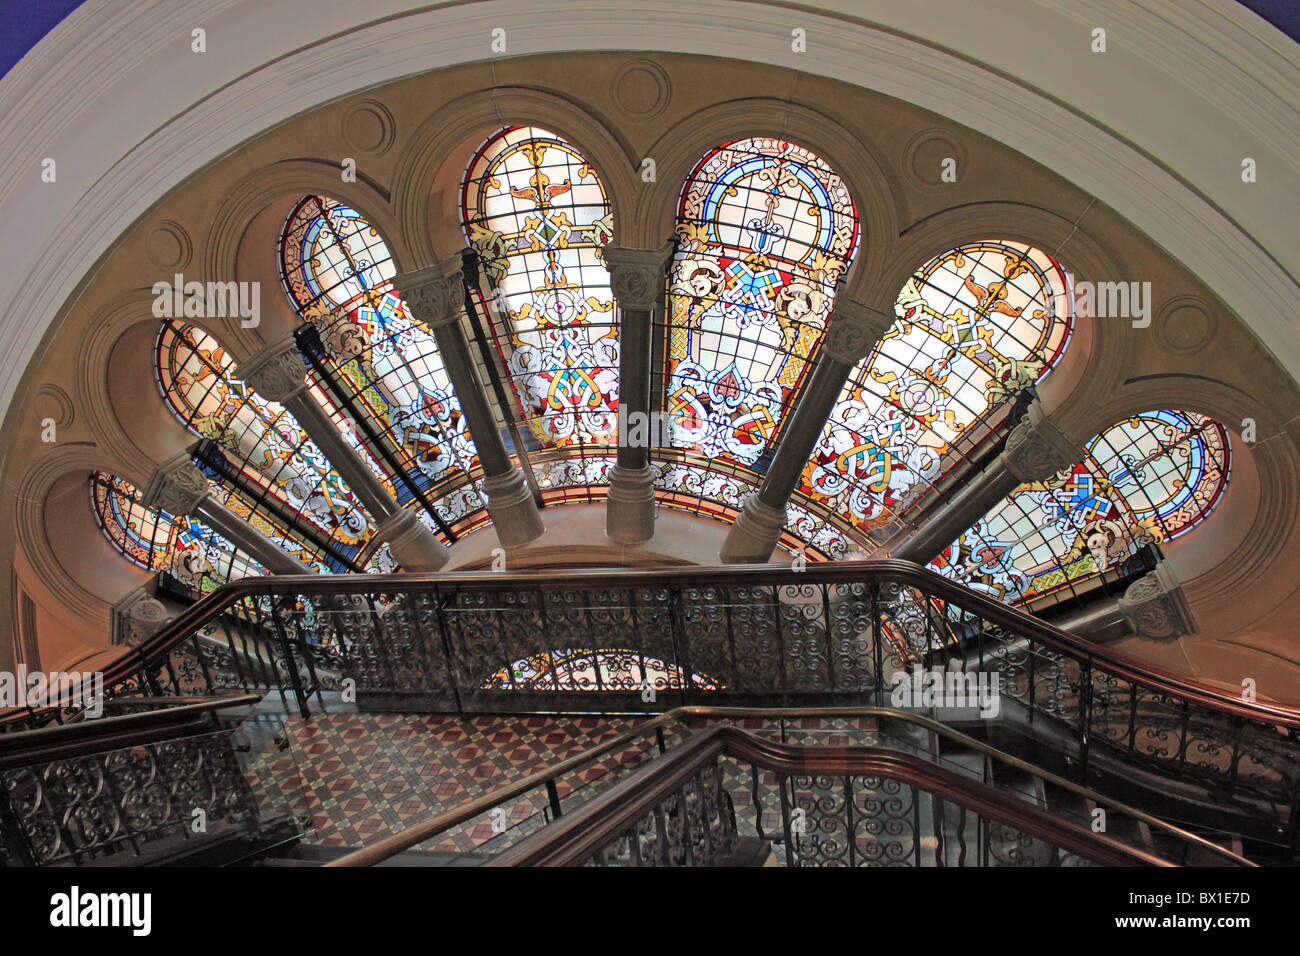 Queen Victoria Building, stained glass windows by stairs, George Street, Sydney, New South Wales, NSW, Australia, Australasia Stock Photo